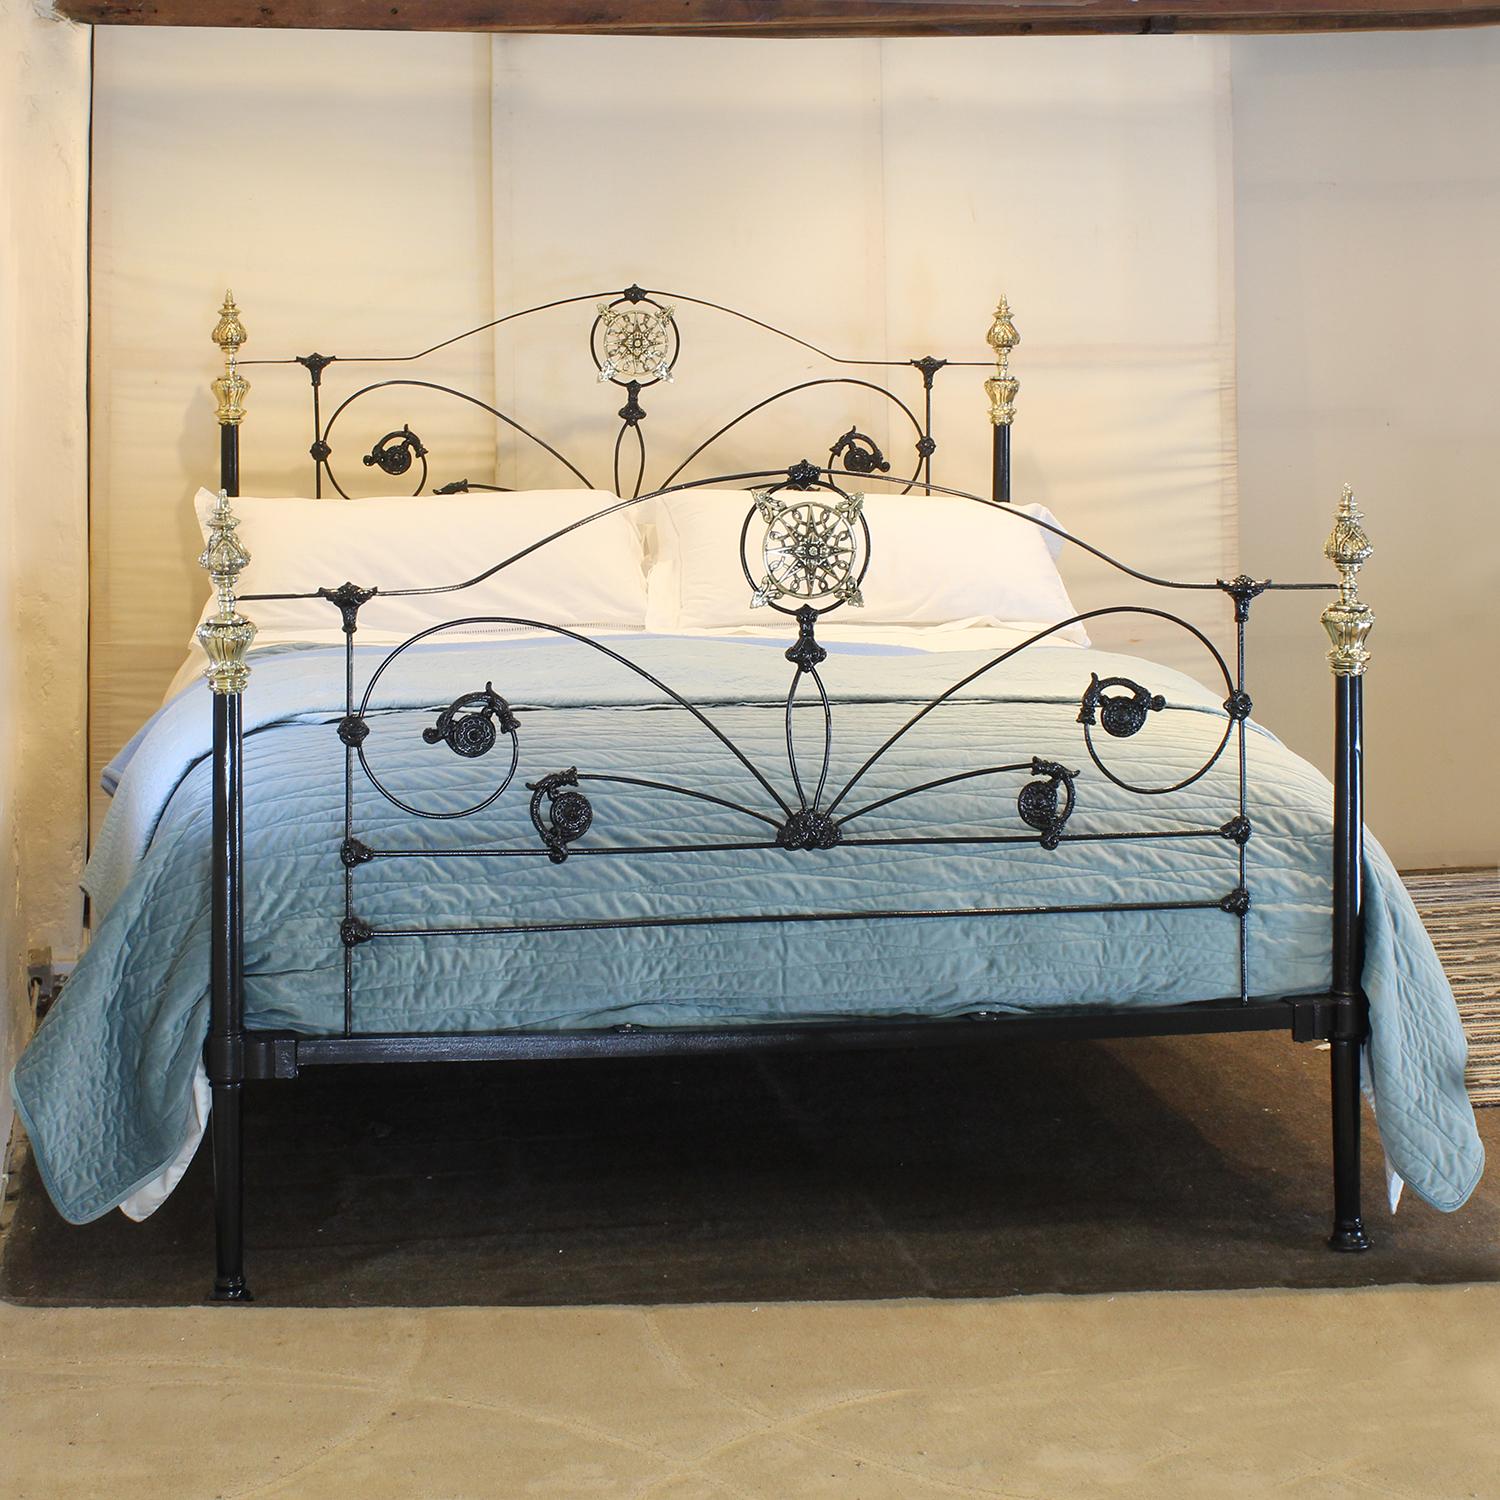 Ornate cast iron and brass bed finished in black with decorative panels and cast iron fittings.

This bed accepts a UK Super King or Californian King Size (6ft, 72 in. or 180cm wide) base and mattress set.

The price includes a standard firm bed